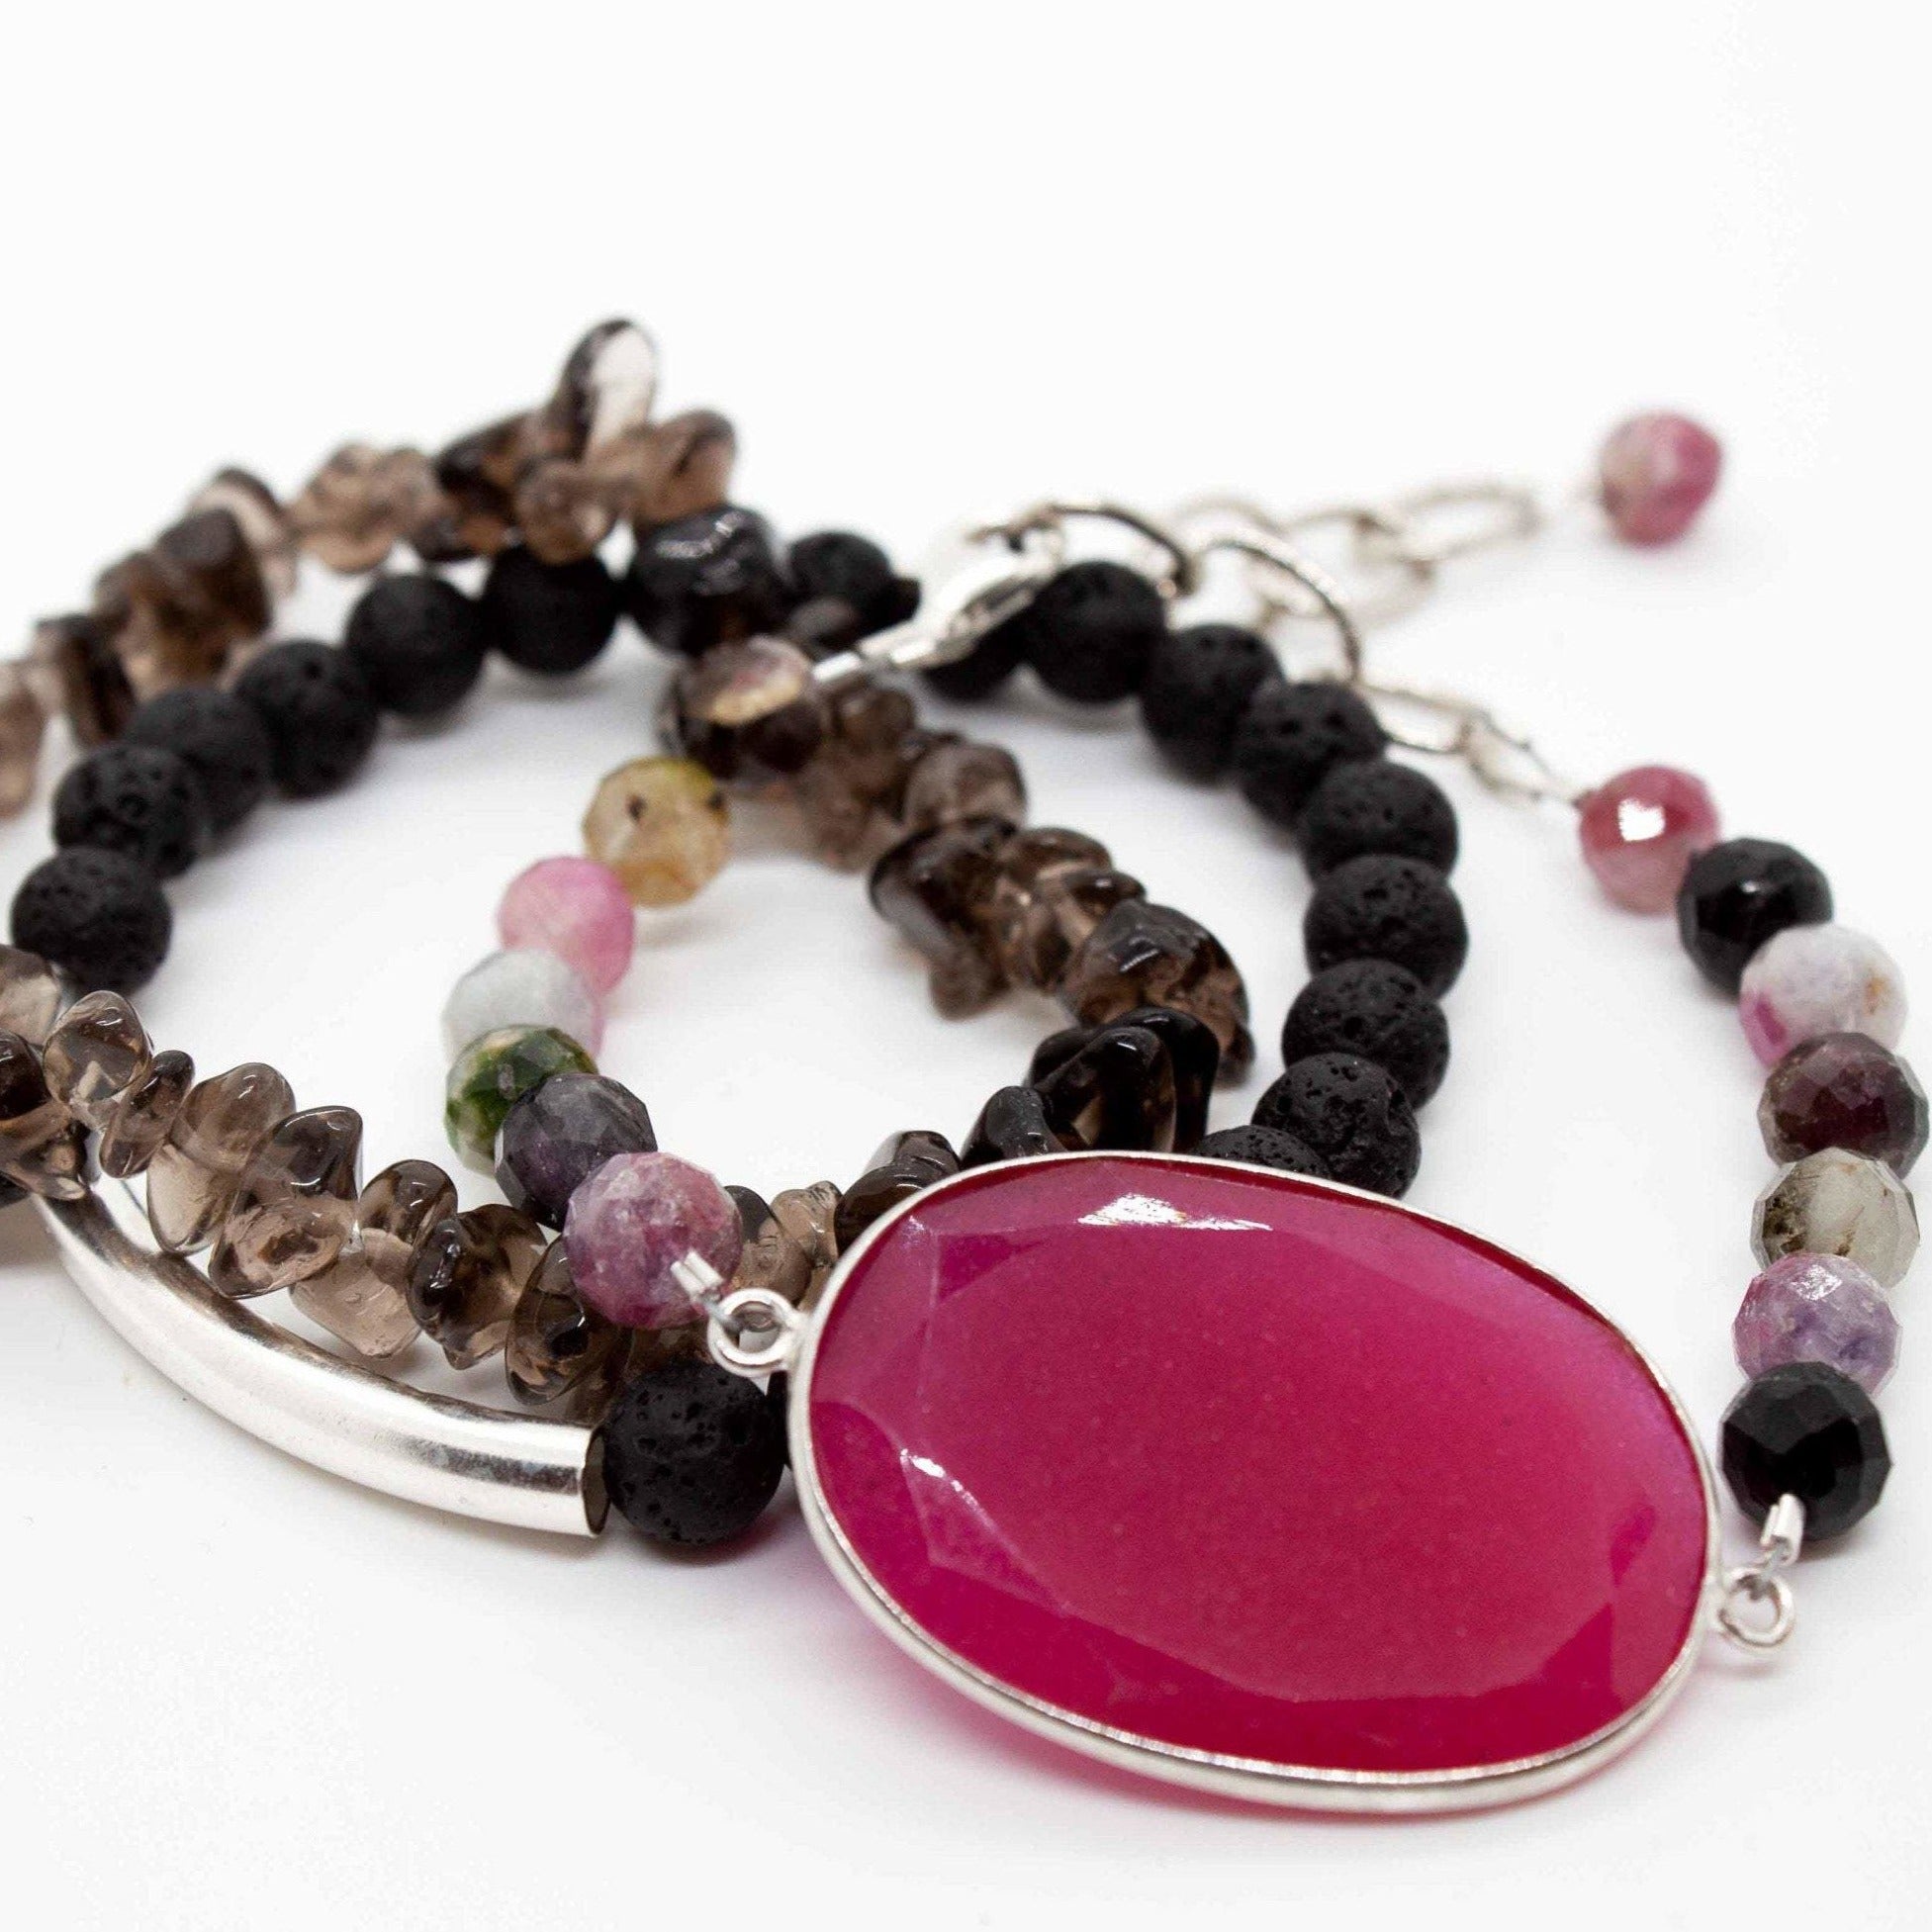 Cadence bracelet stack: 3 beaded bracelets made from rainbow tourmaline, lava, smoky quartz and sterling silver. Tourmaline bracelet has large ruby pendant and adjustable sterling silver lobster clasp.